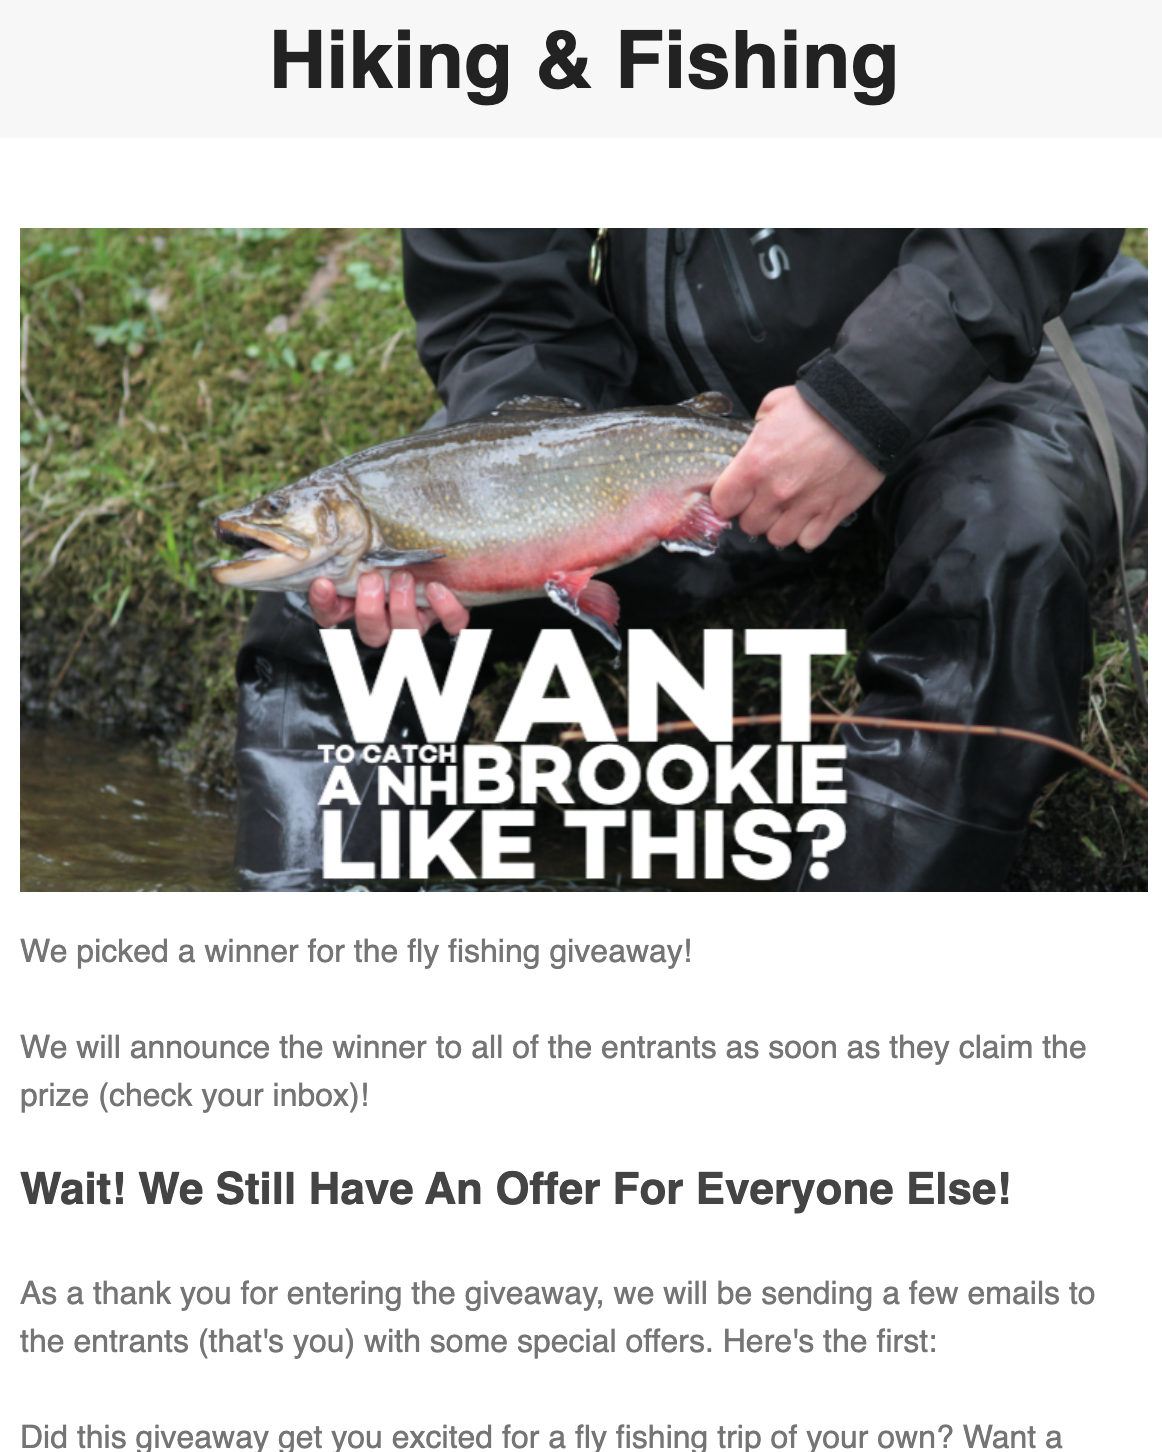 An email showing a header of "Hiking & Fishing," an image with text that reads "Want to catch a NH brookie like this?" and sharing details about an offer for people interested in booking a fly fishing trip.